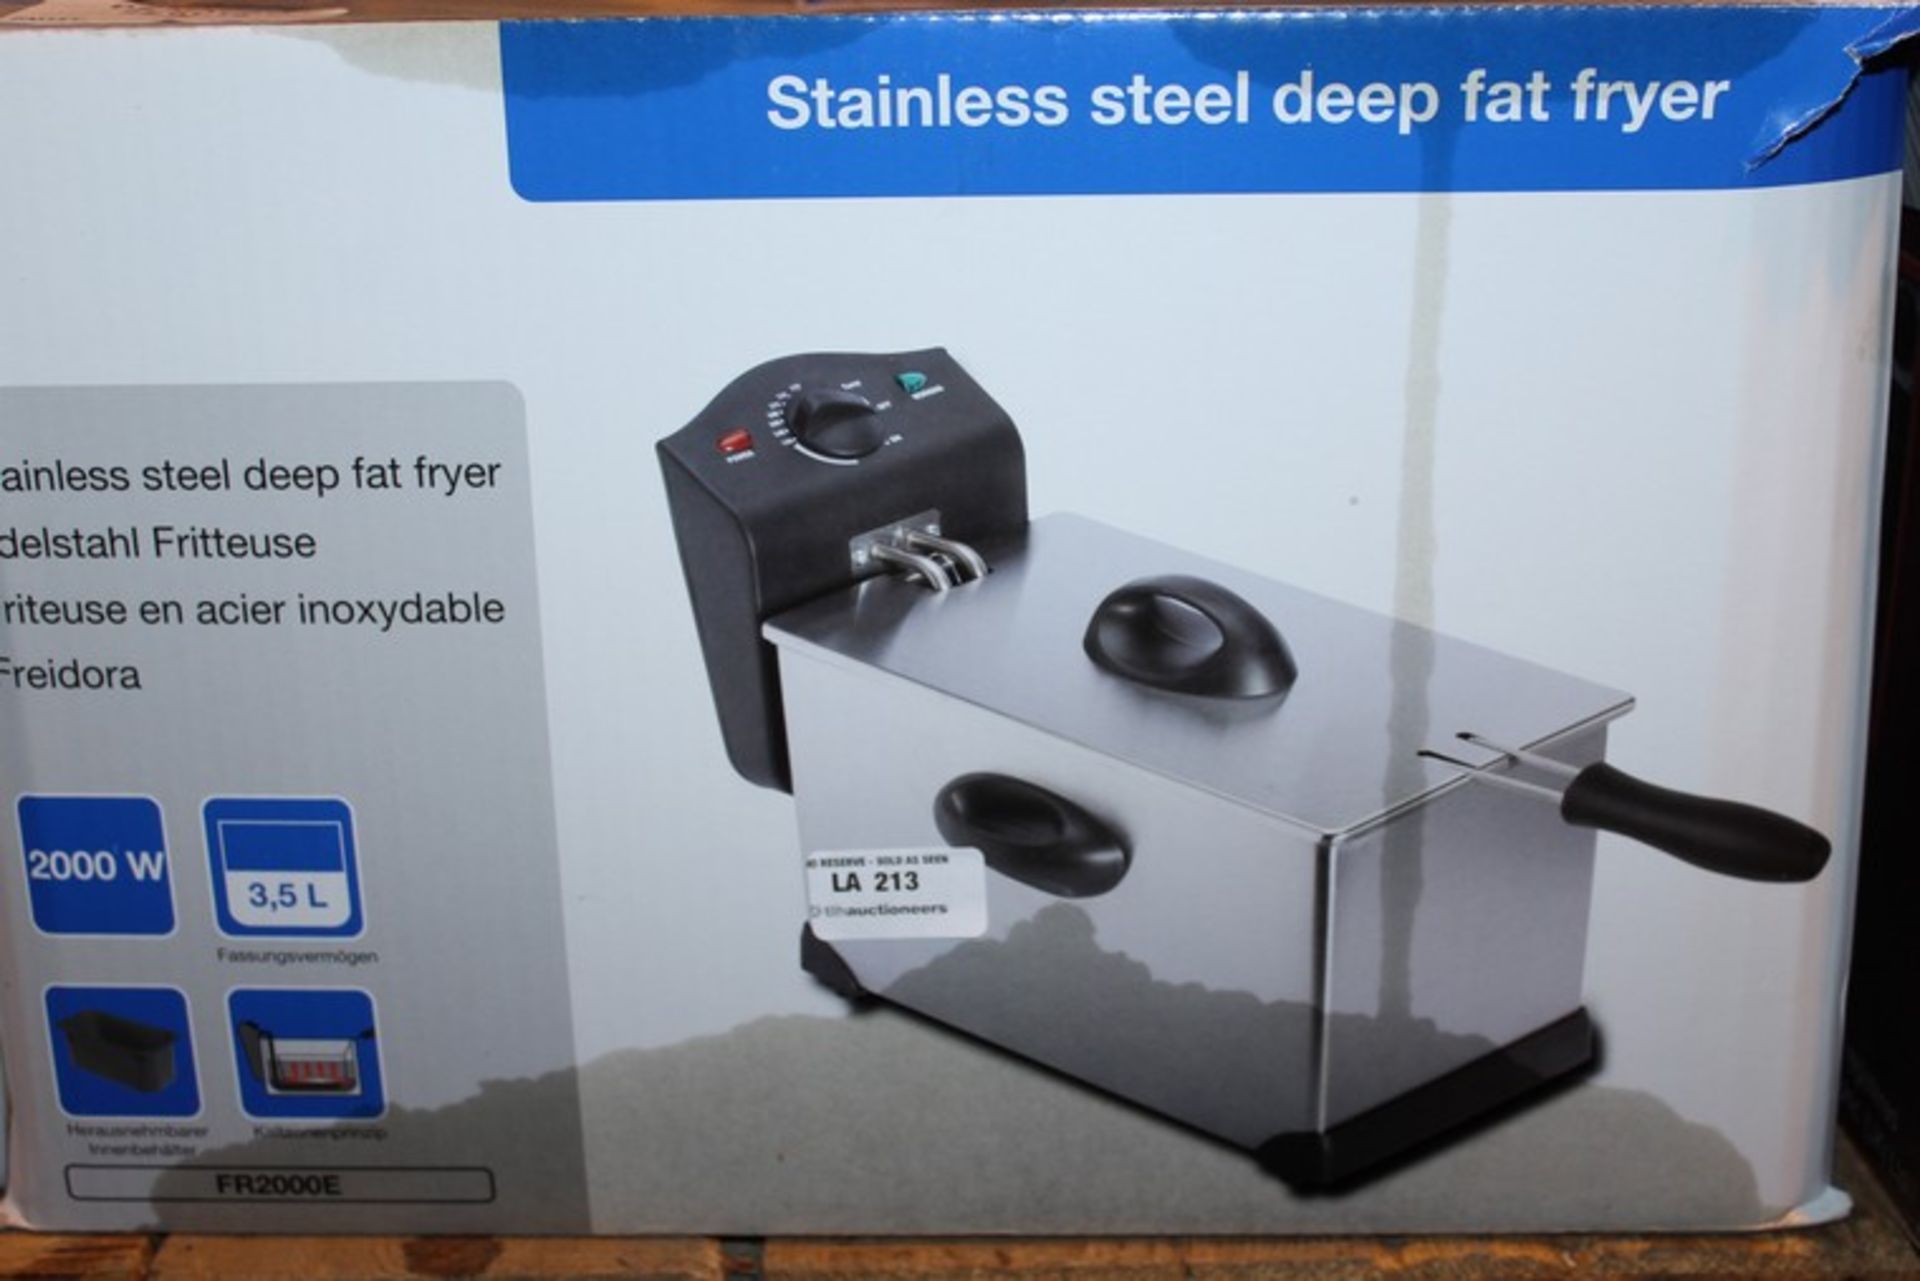 1 x STAINLESS STEEL DEEP FAT FRYER (25.01.18) (P1) *PLEASE NOTE THAT THE BID PRICE IS MULTIPLIED